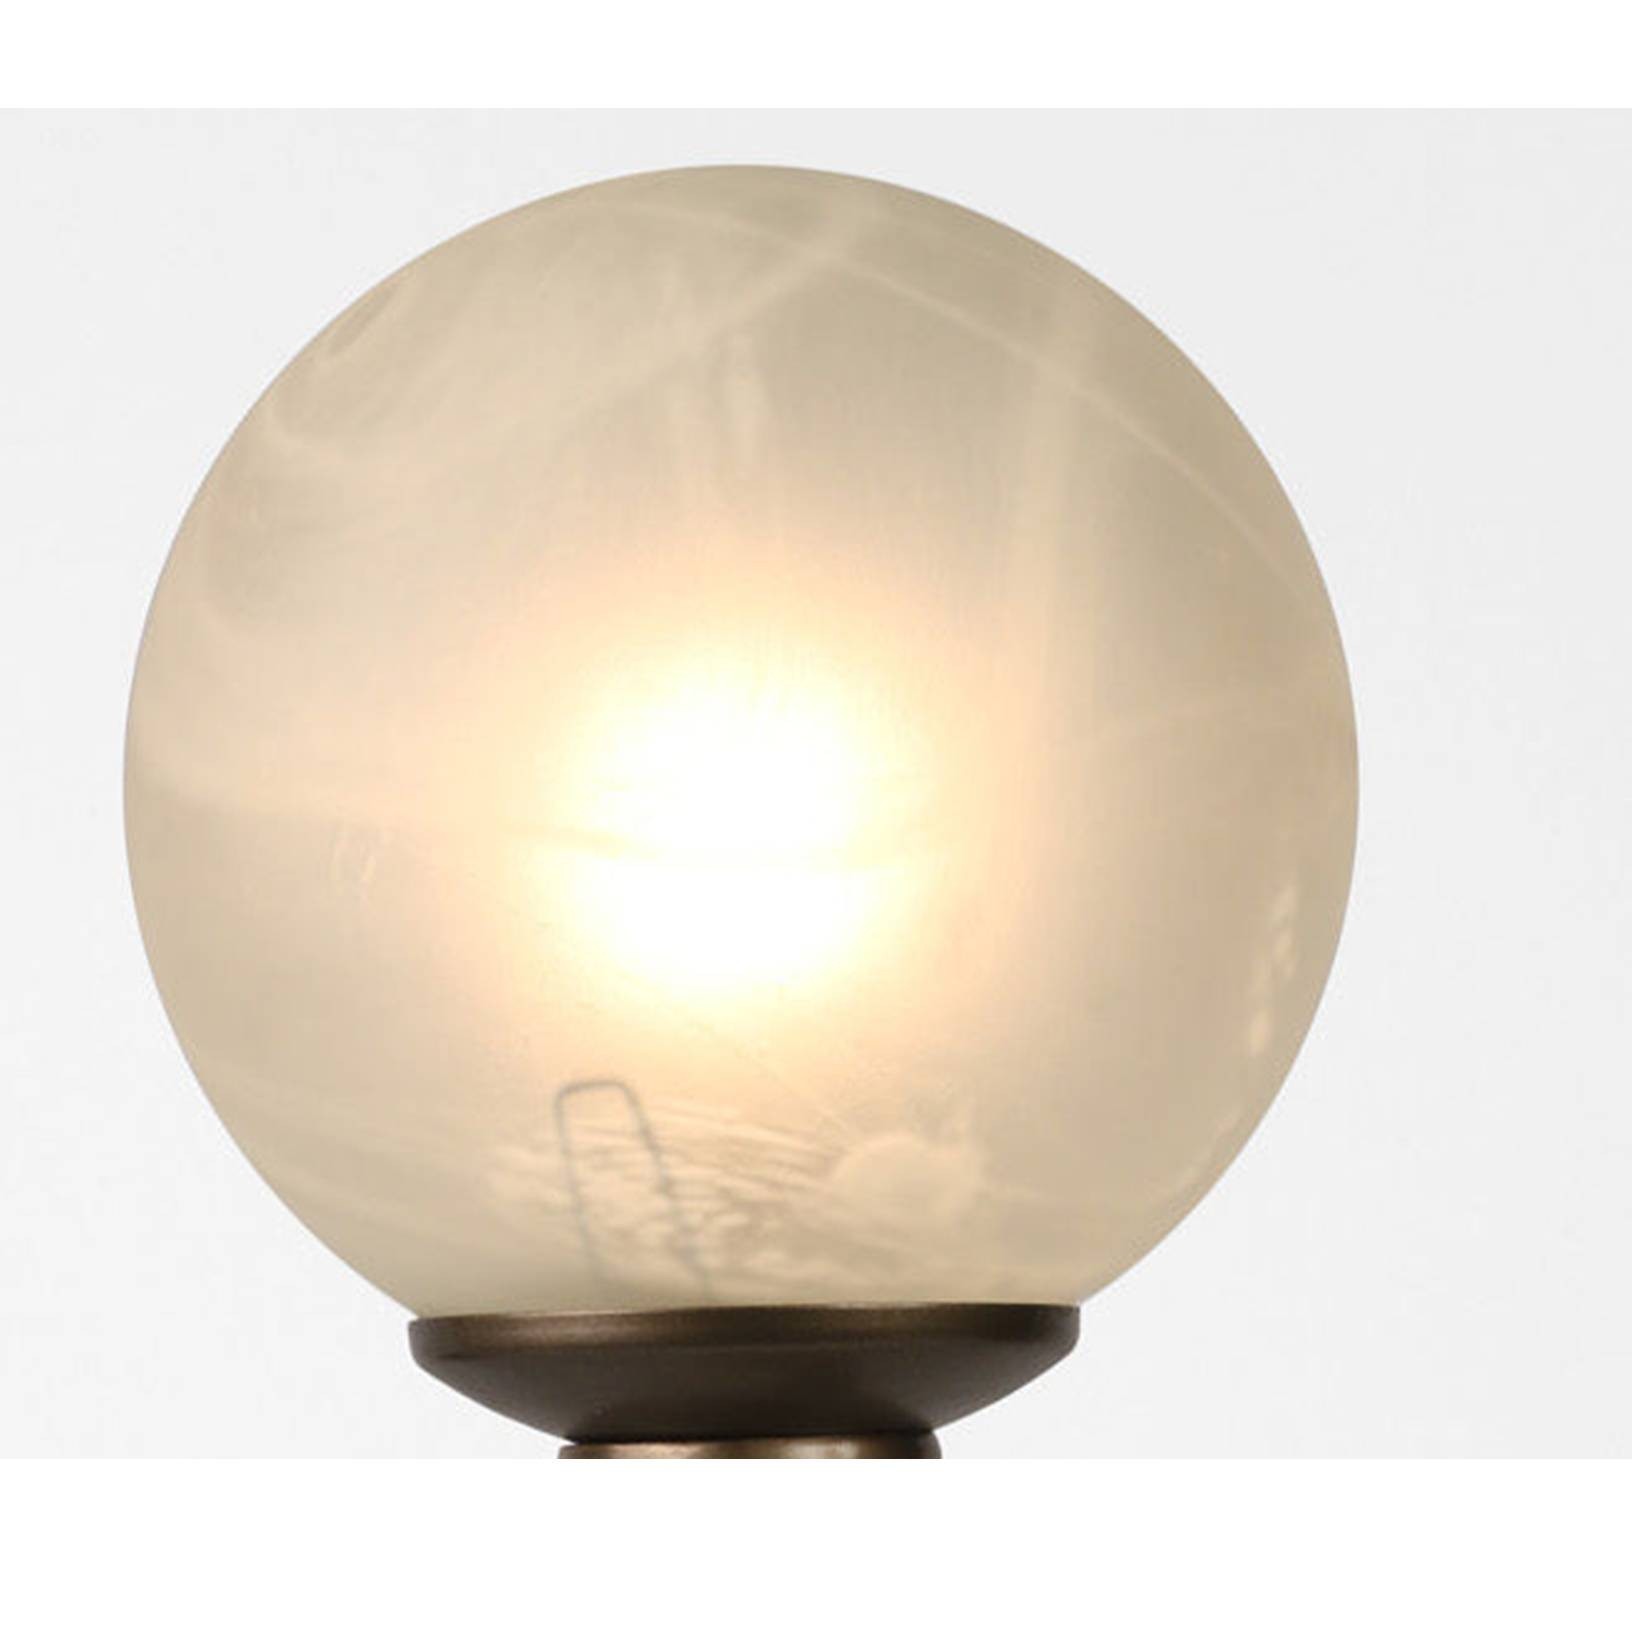 REPLACEMENT SHADE - Art Deco Style Glass Globe Shade 6"